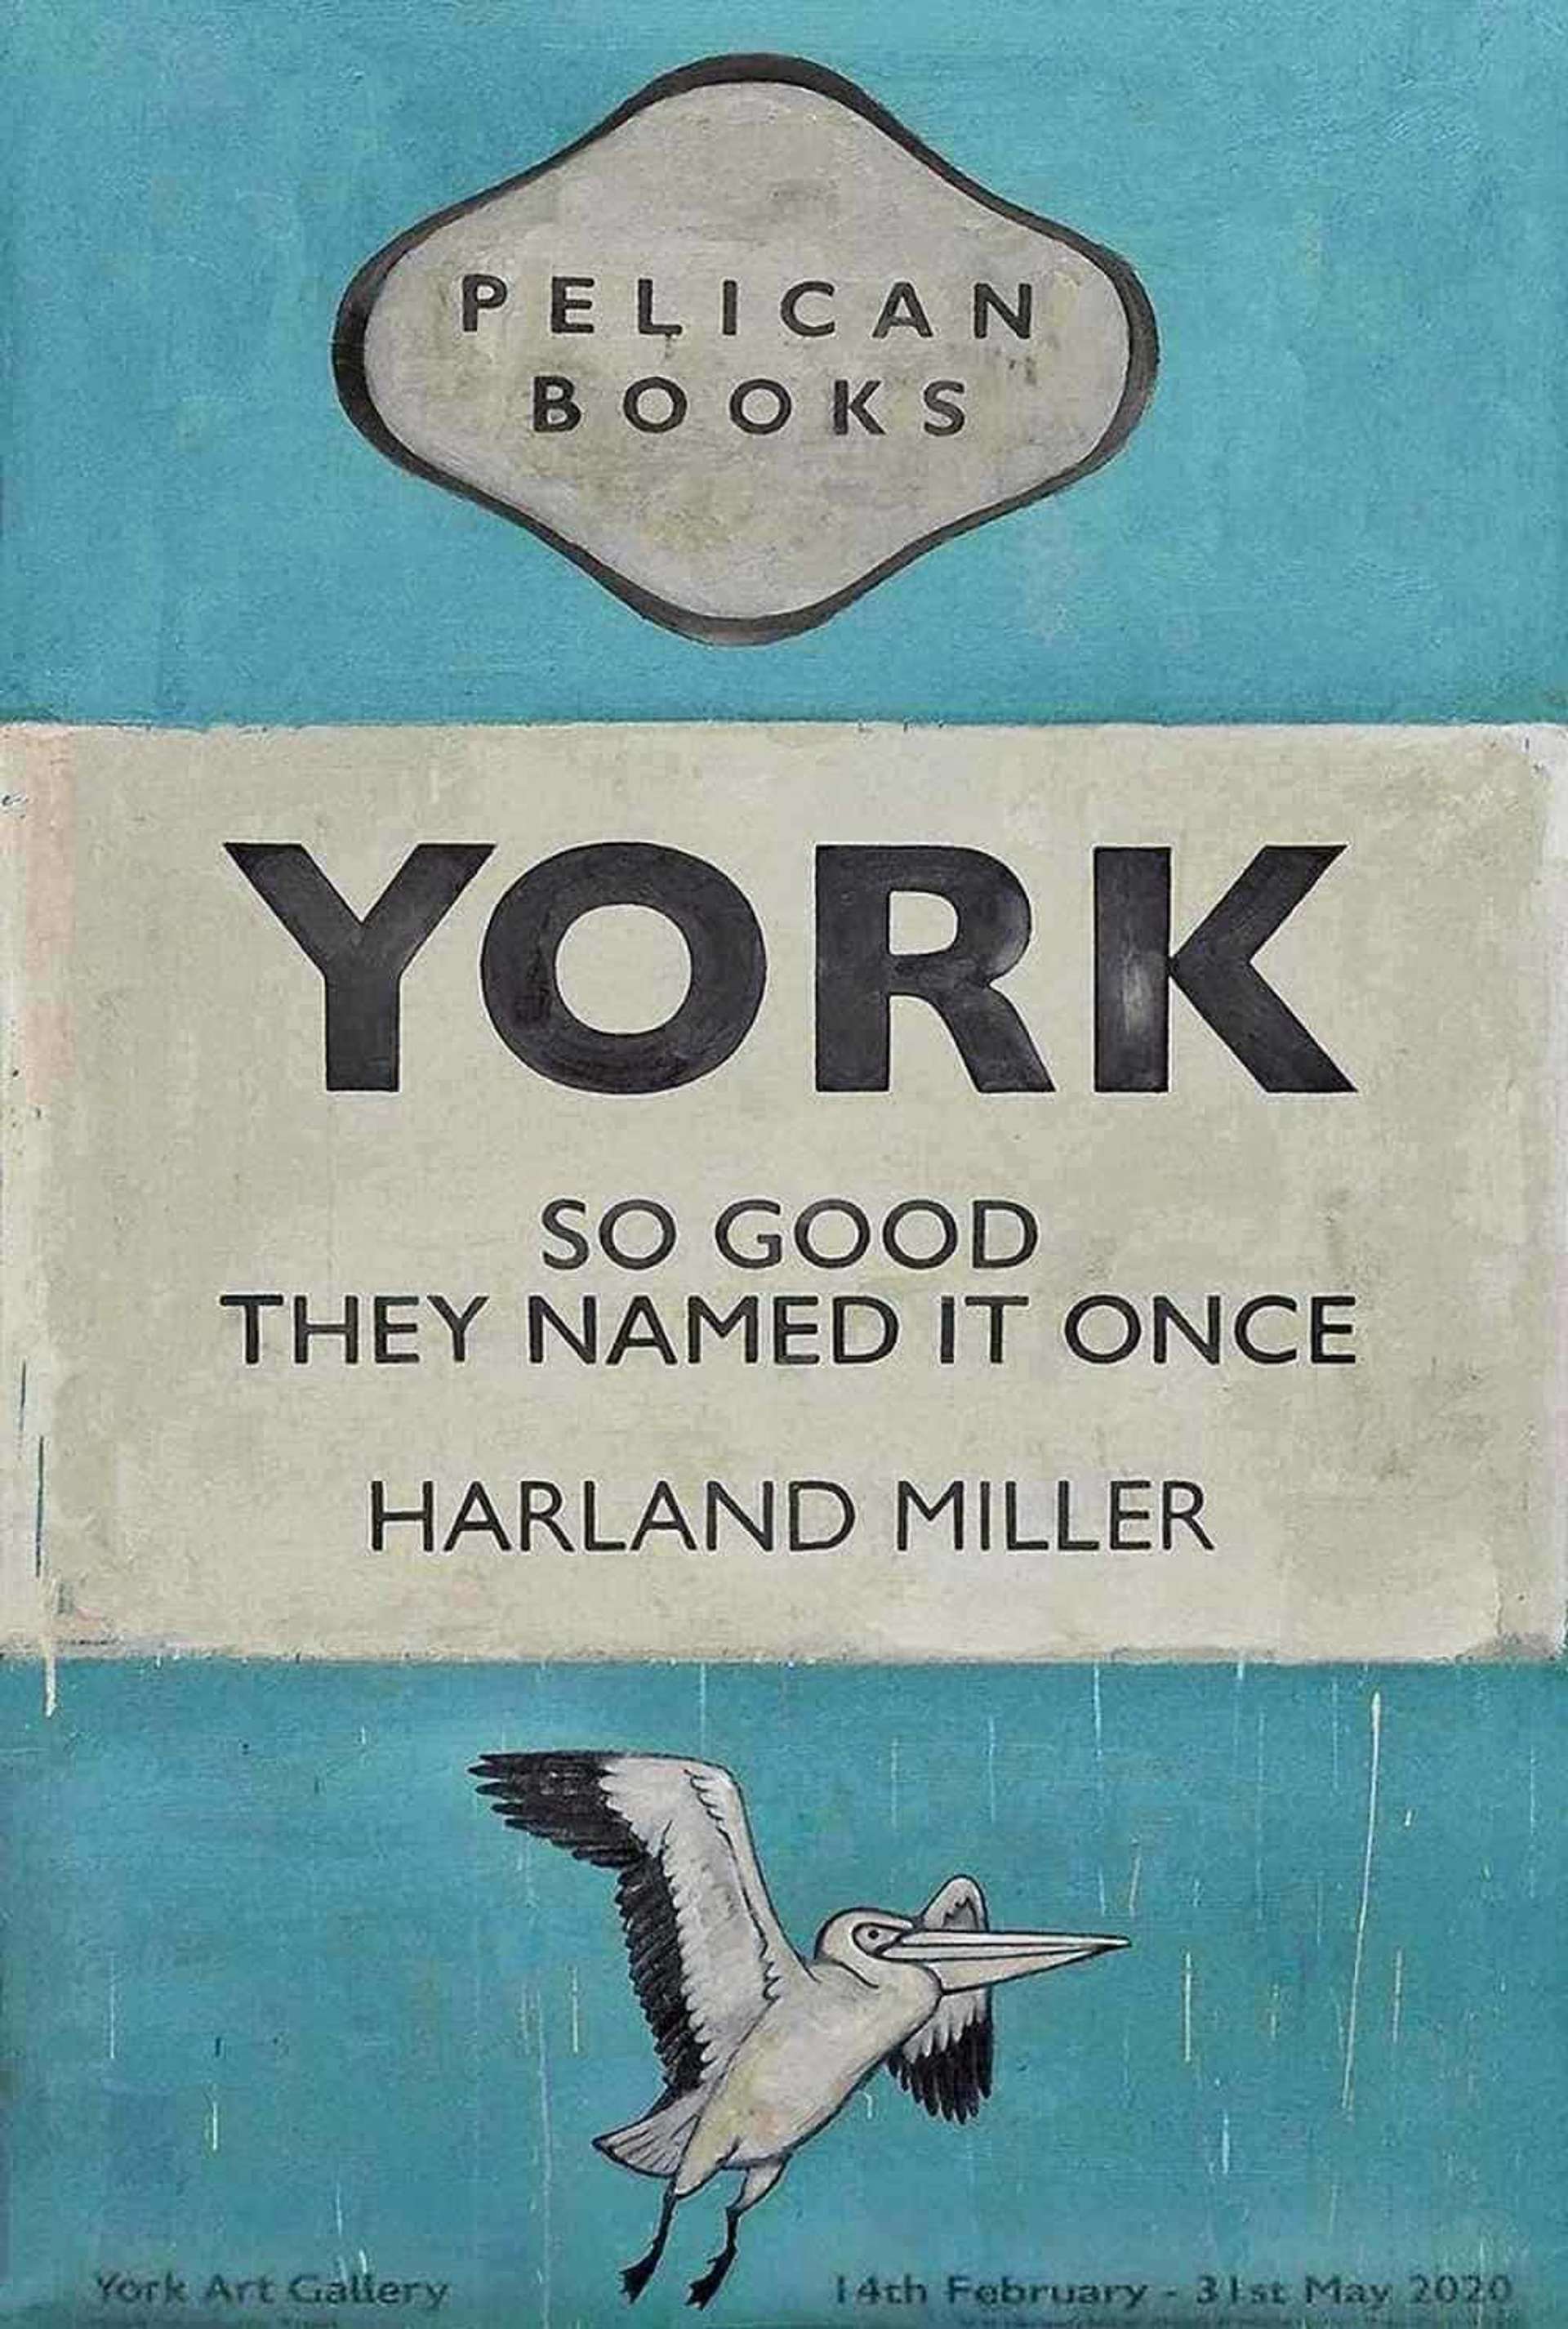 The print depicts the dust jacket of a Pelican book, titled York So Good They Named It Once. The book's jacket is rendered in pale blue with the title in bold black writing in the centre of the composition. Below the title, Miller includes the publisher’s logo, a flying pelican.